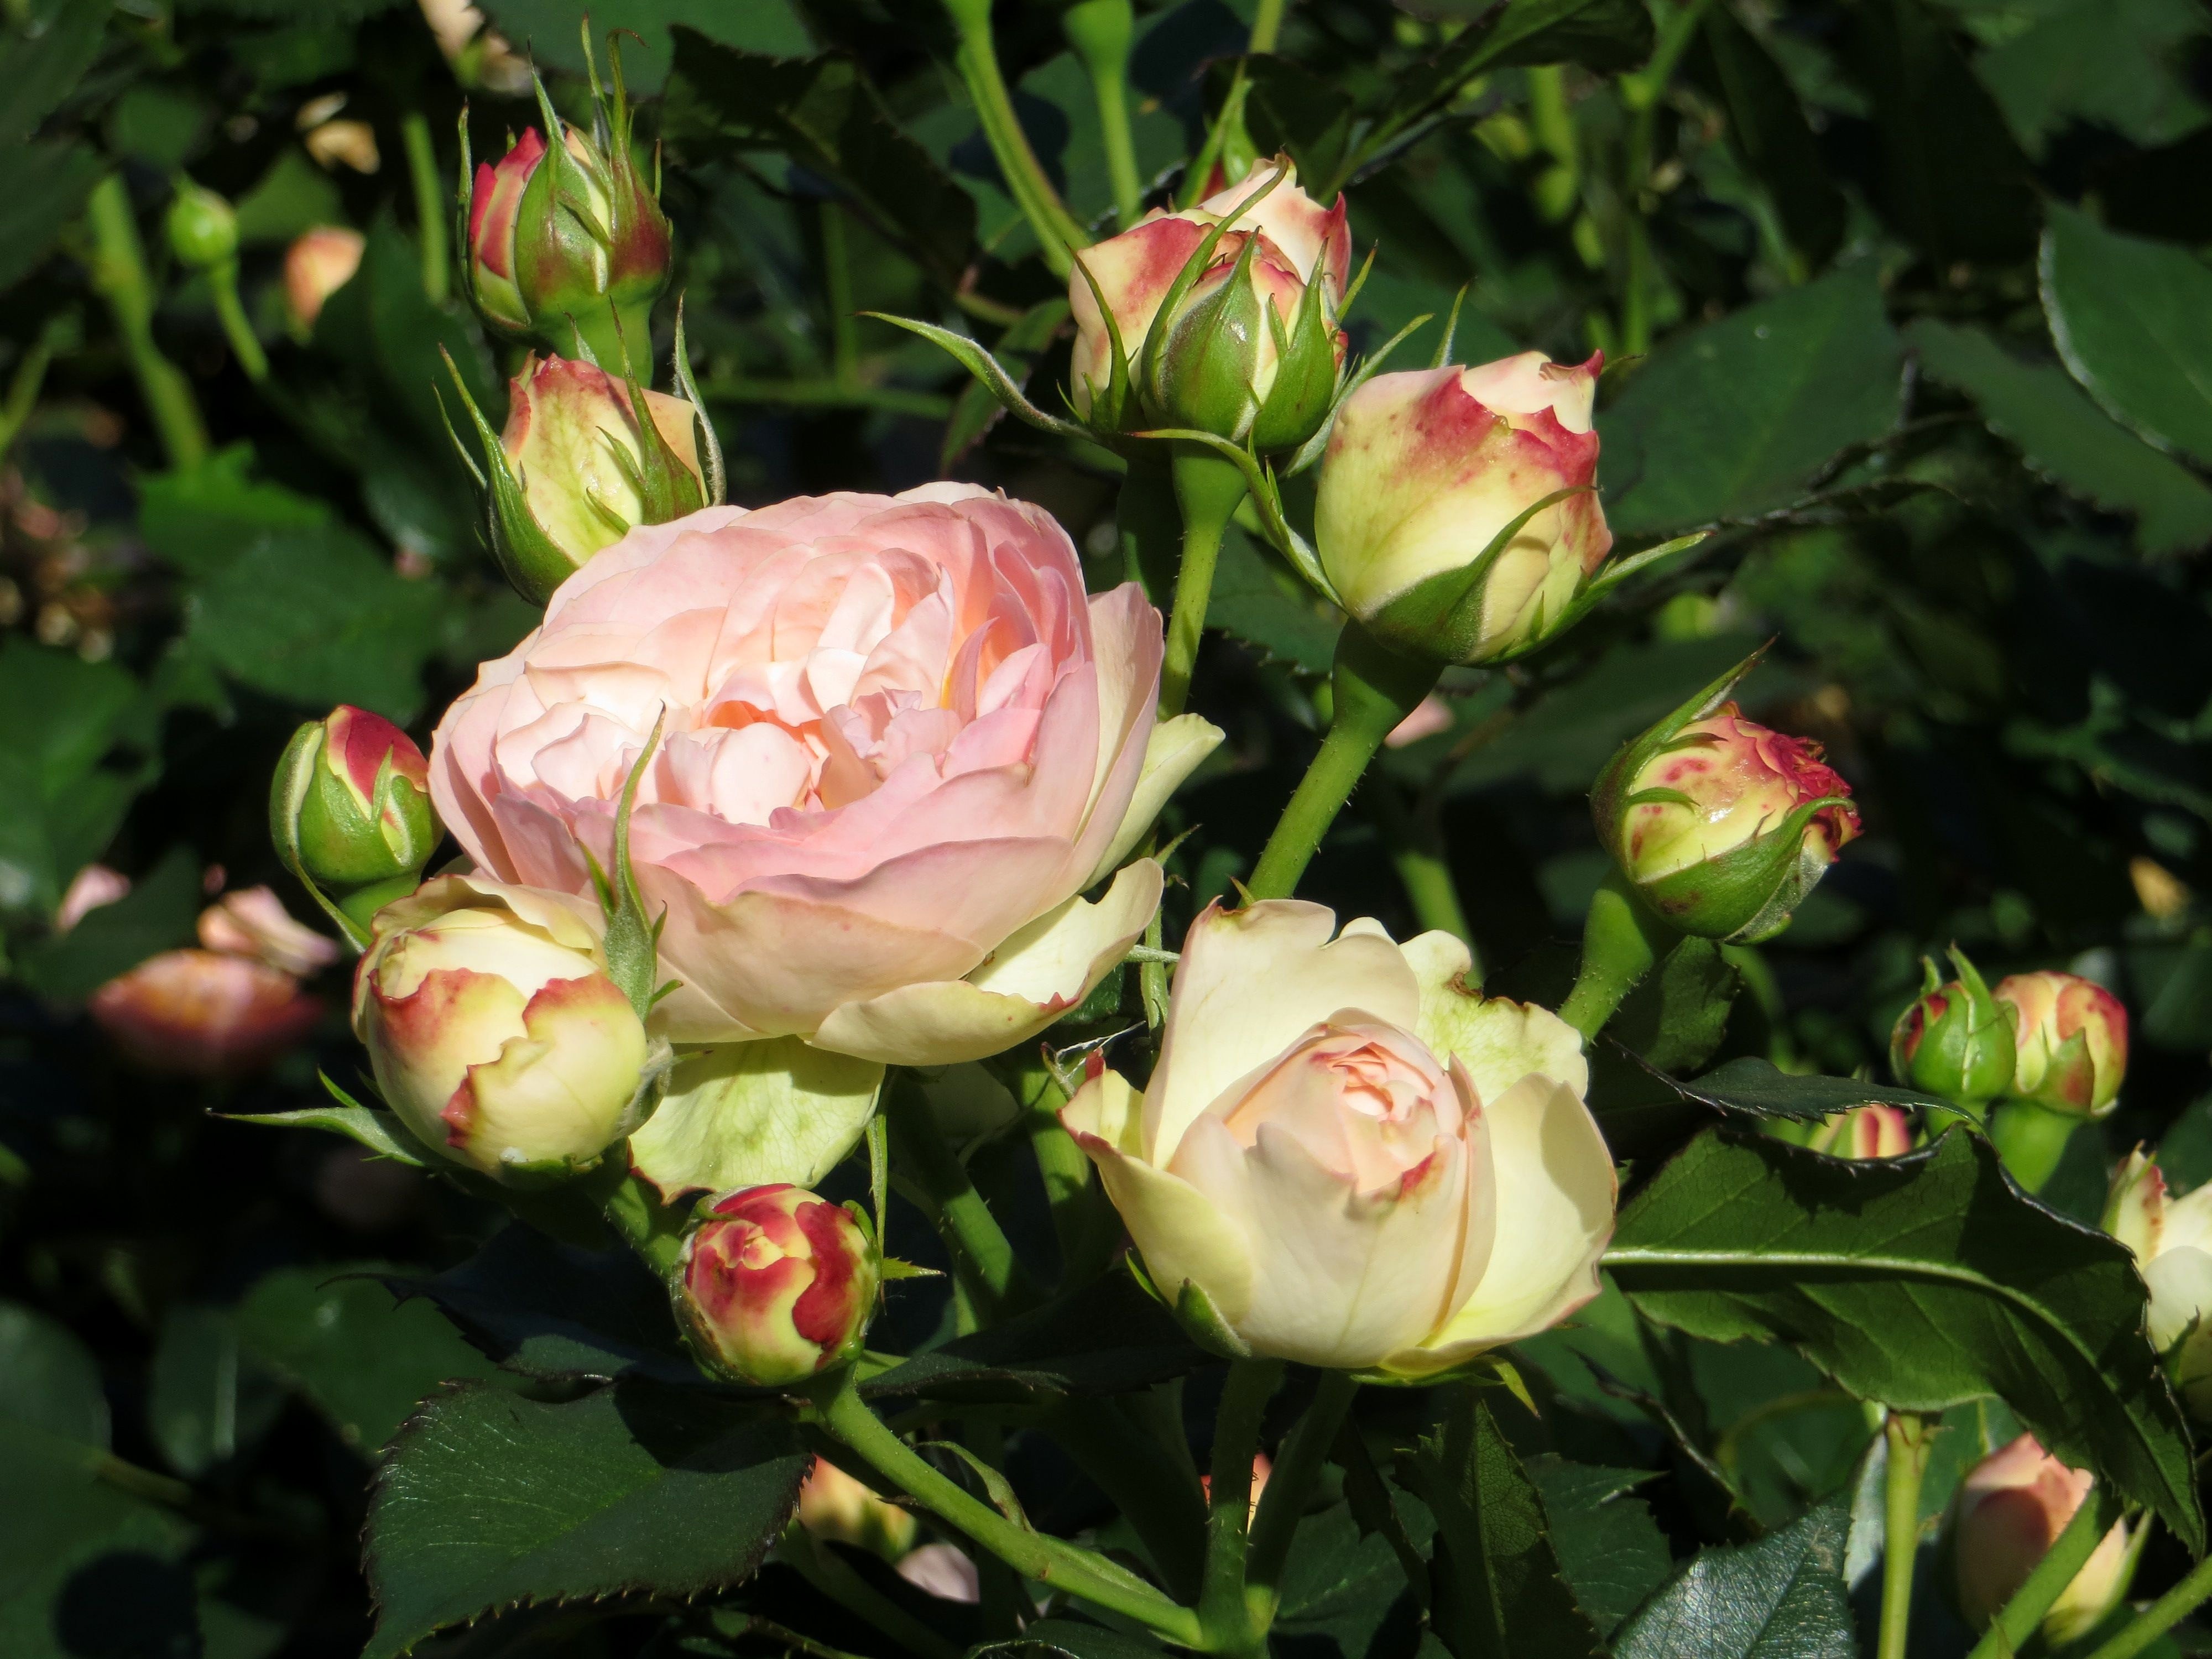 pink-and-white petaled rose on bloom at daytime